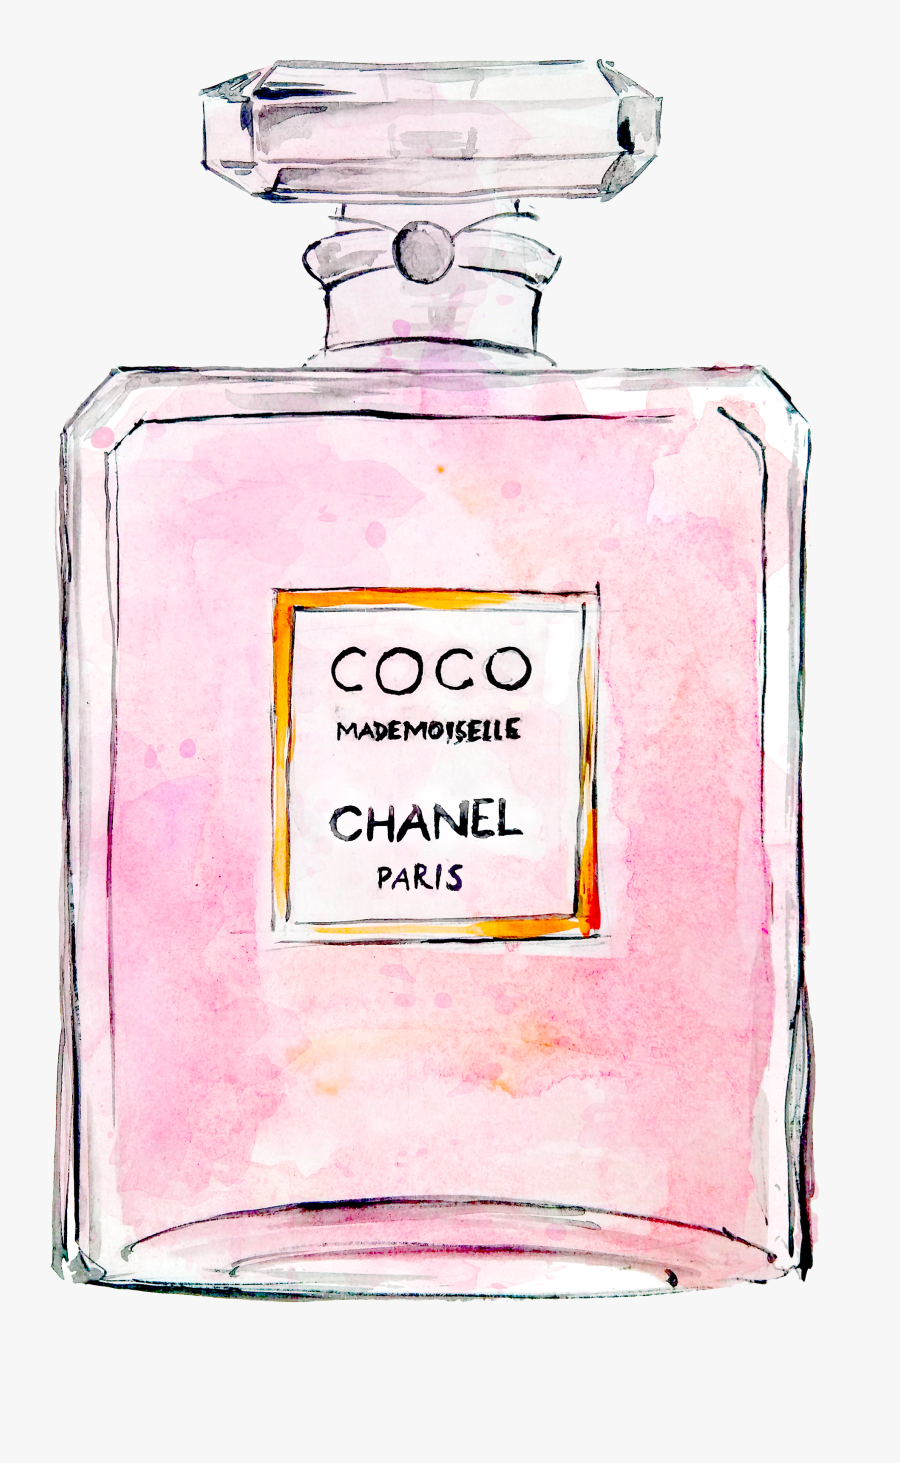 Chanel Drawing Coco Mademoiselle - Cartoon Images Of Coco Chanel, Transparent Clipart